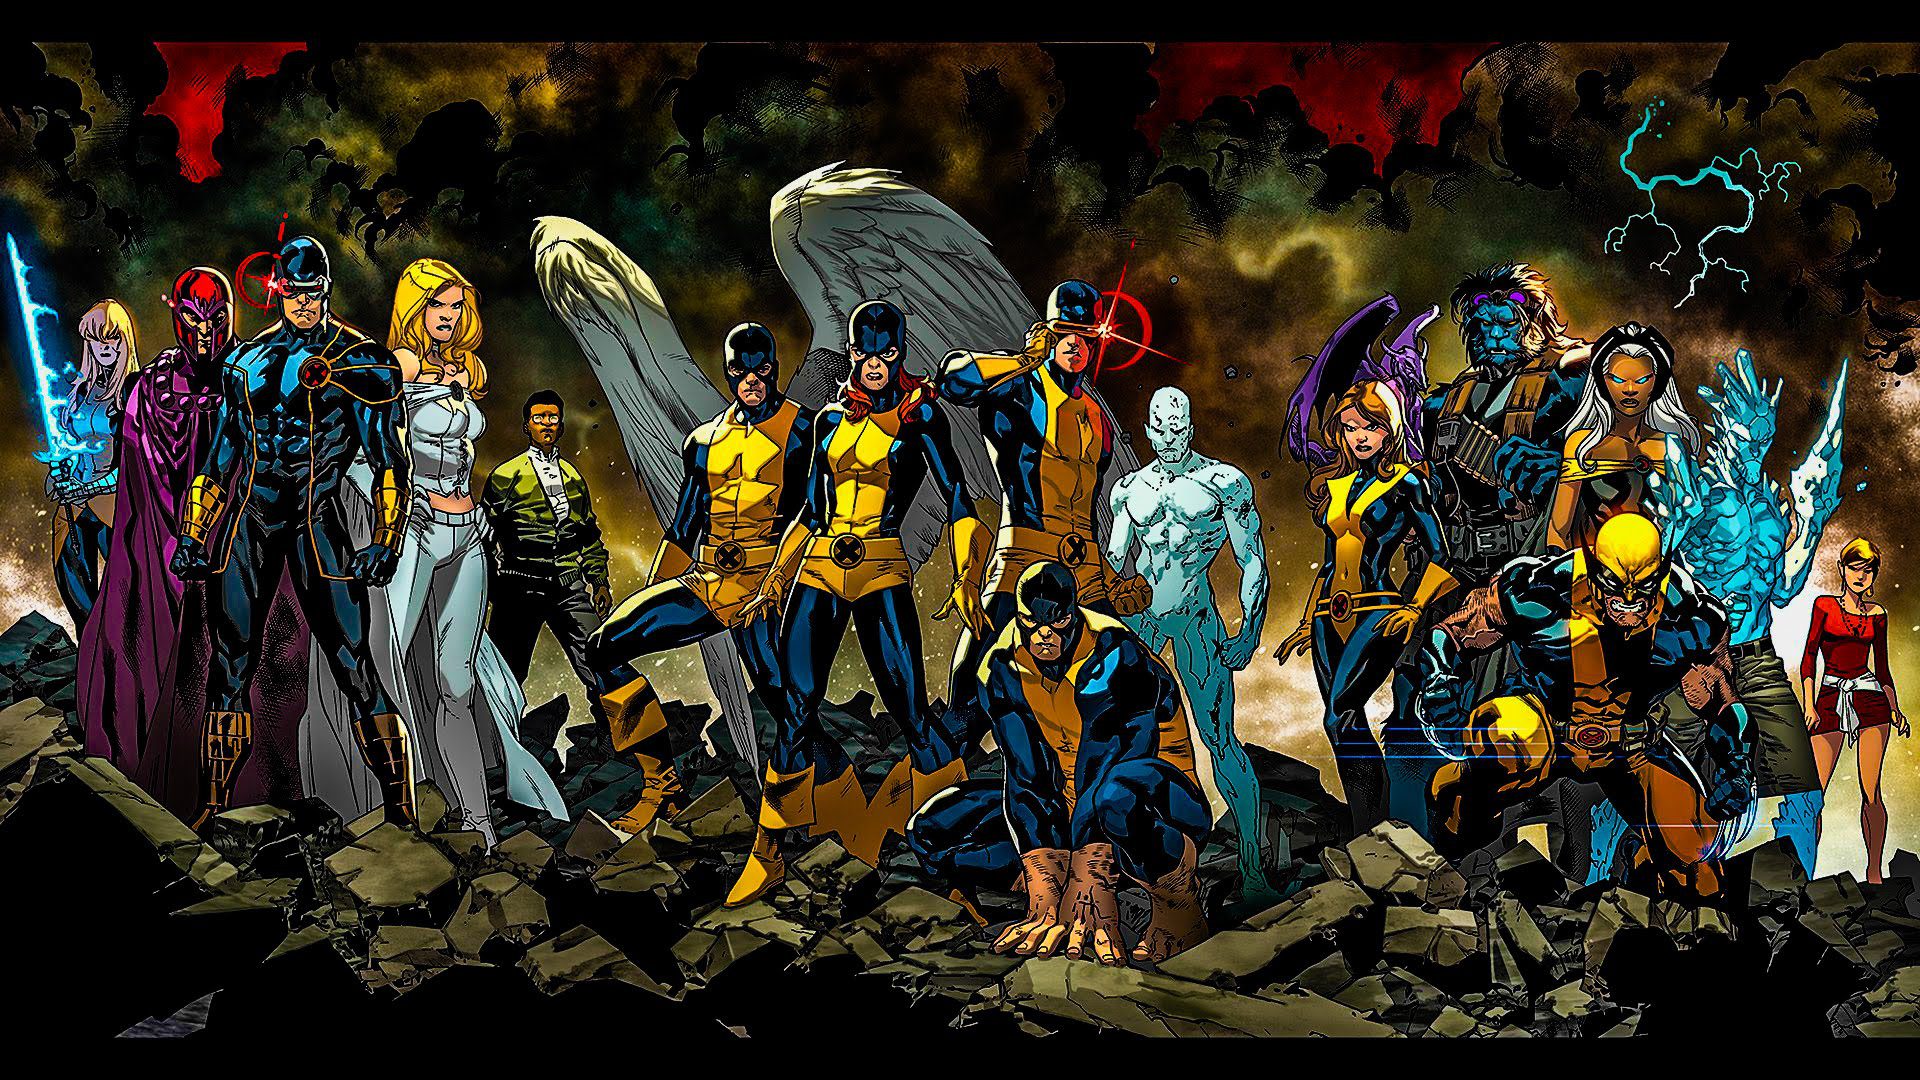 The Most Powerful Mutants In The X-Men Universe